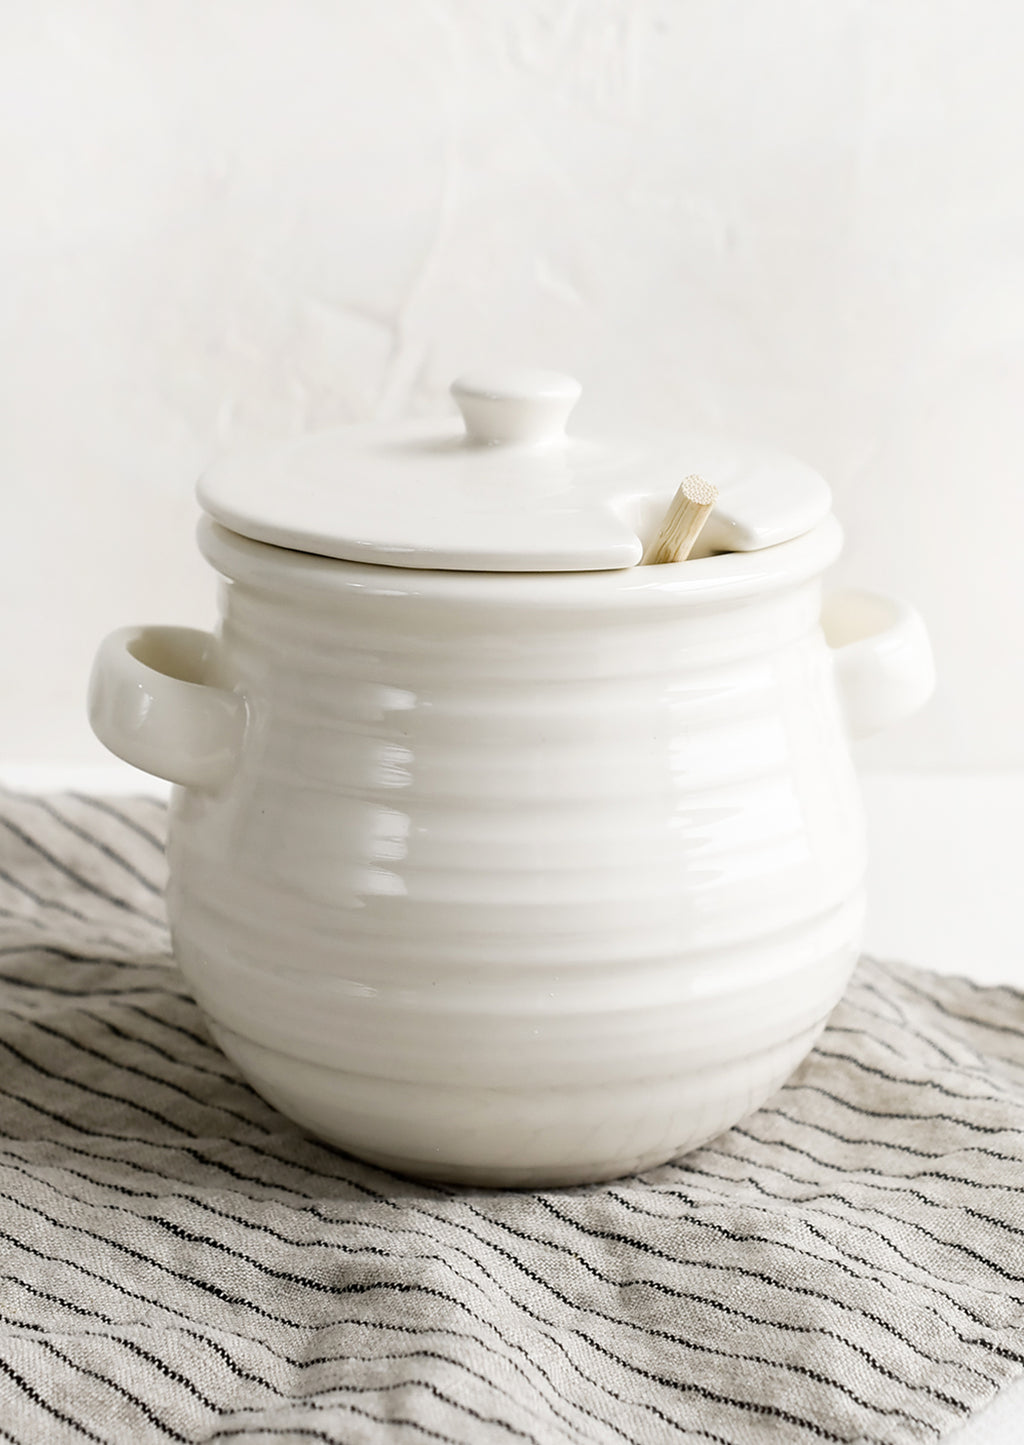 1: A glossy white ceramic honey jar with side handles and lid.